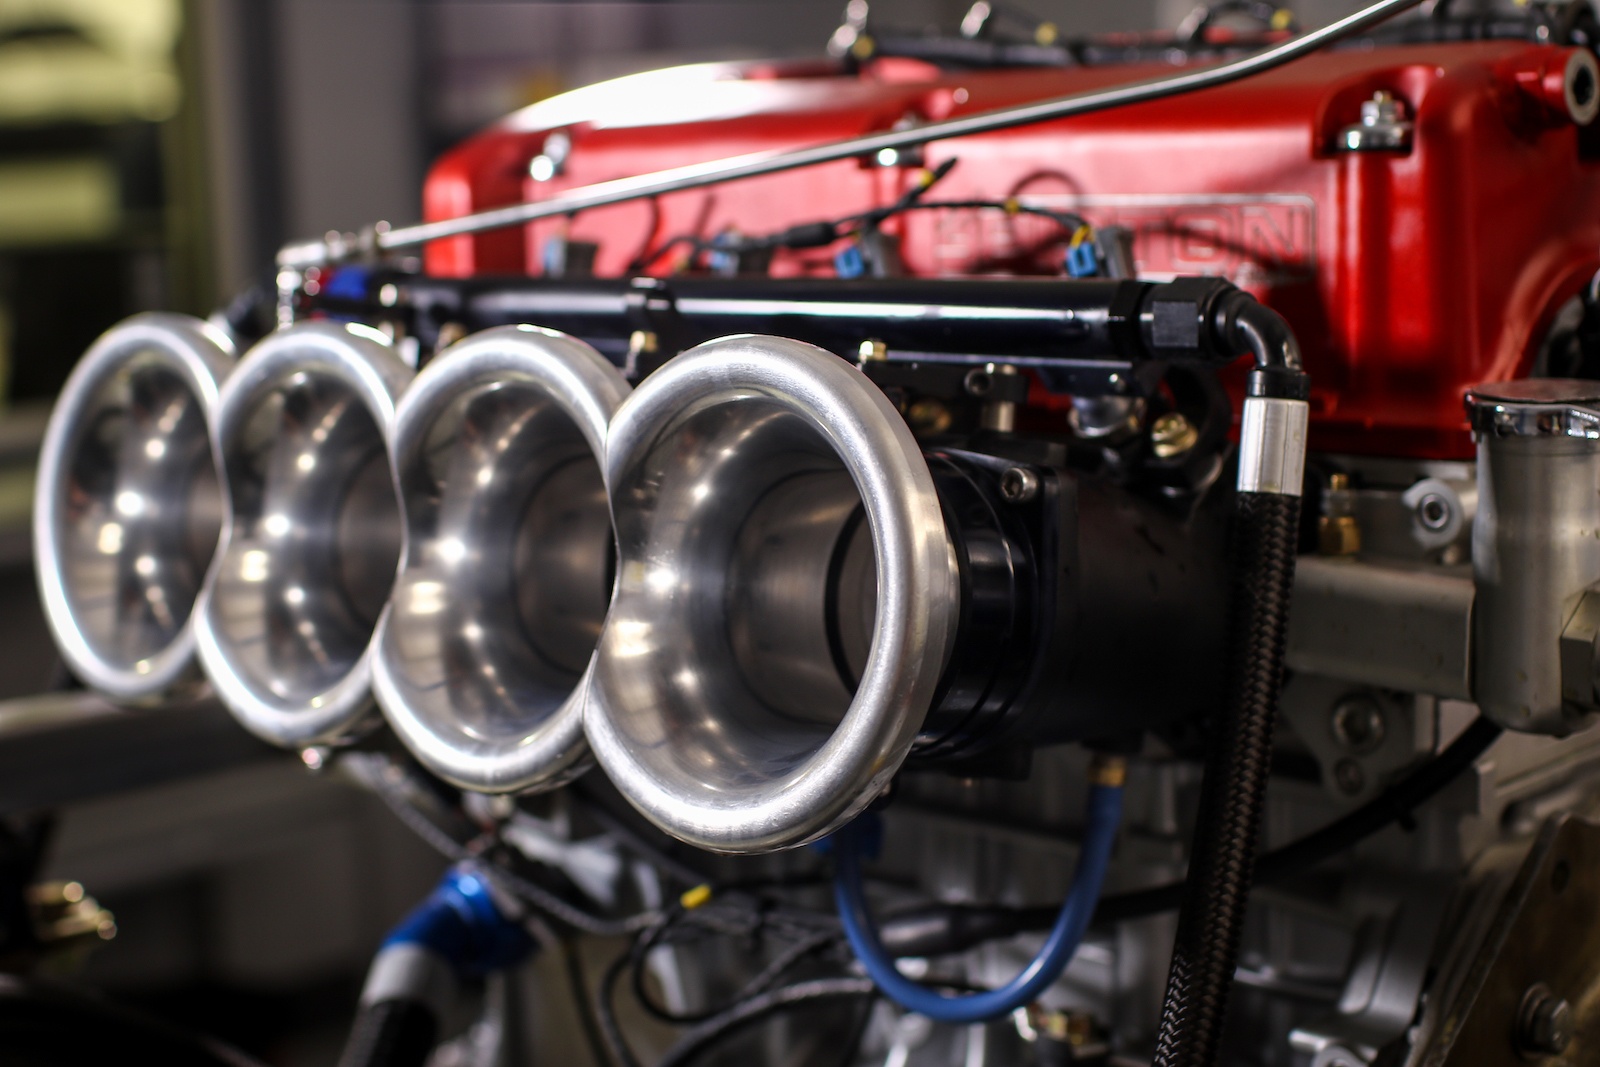 The 500 Horsepower Naturally Aspirated K24 Engine By 4piston